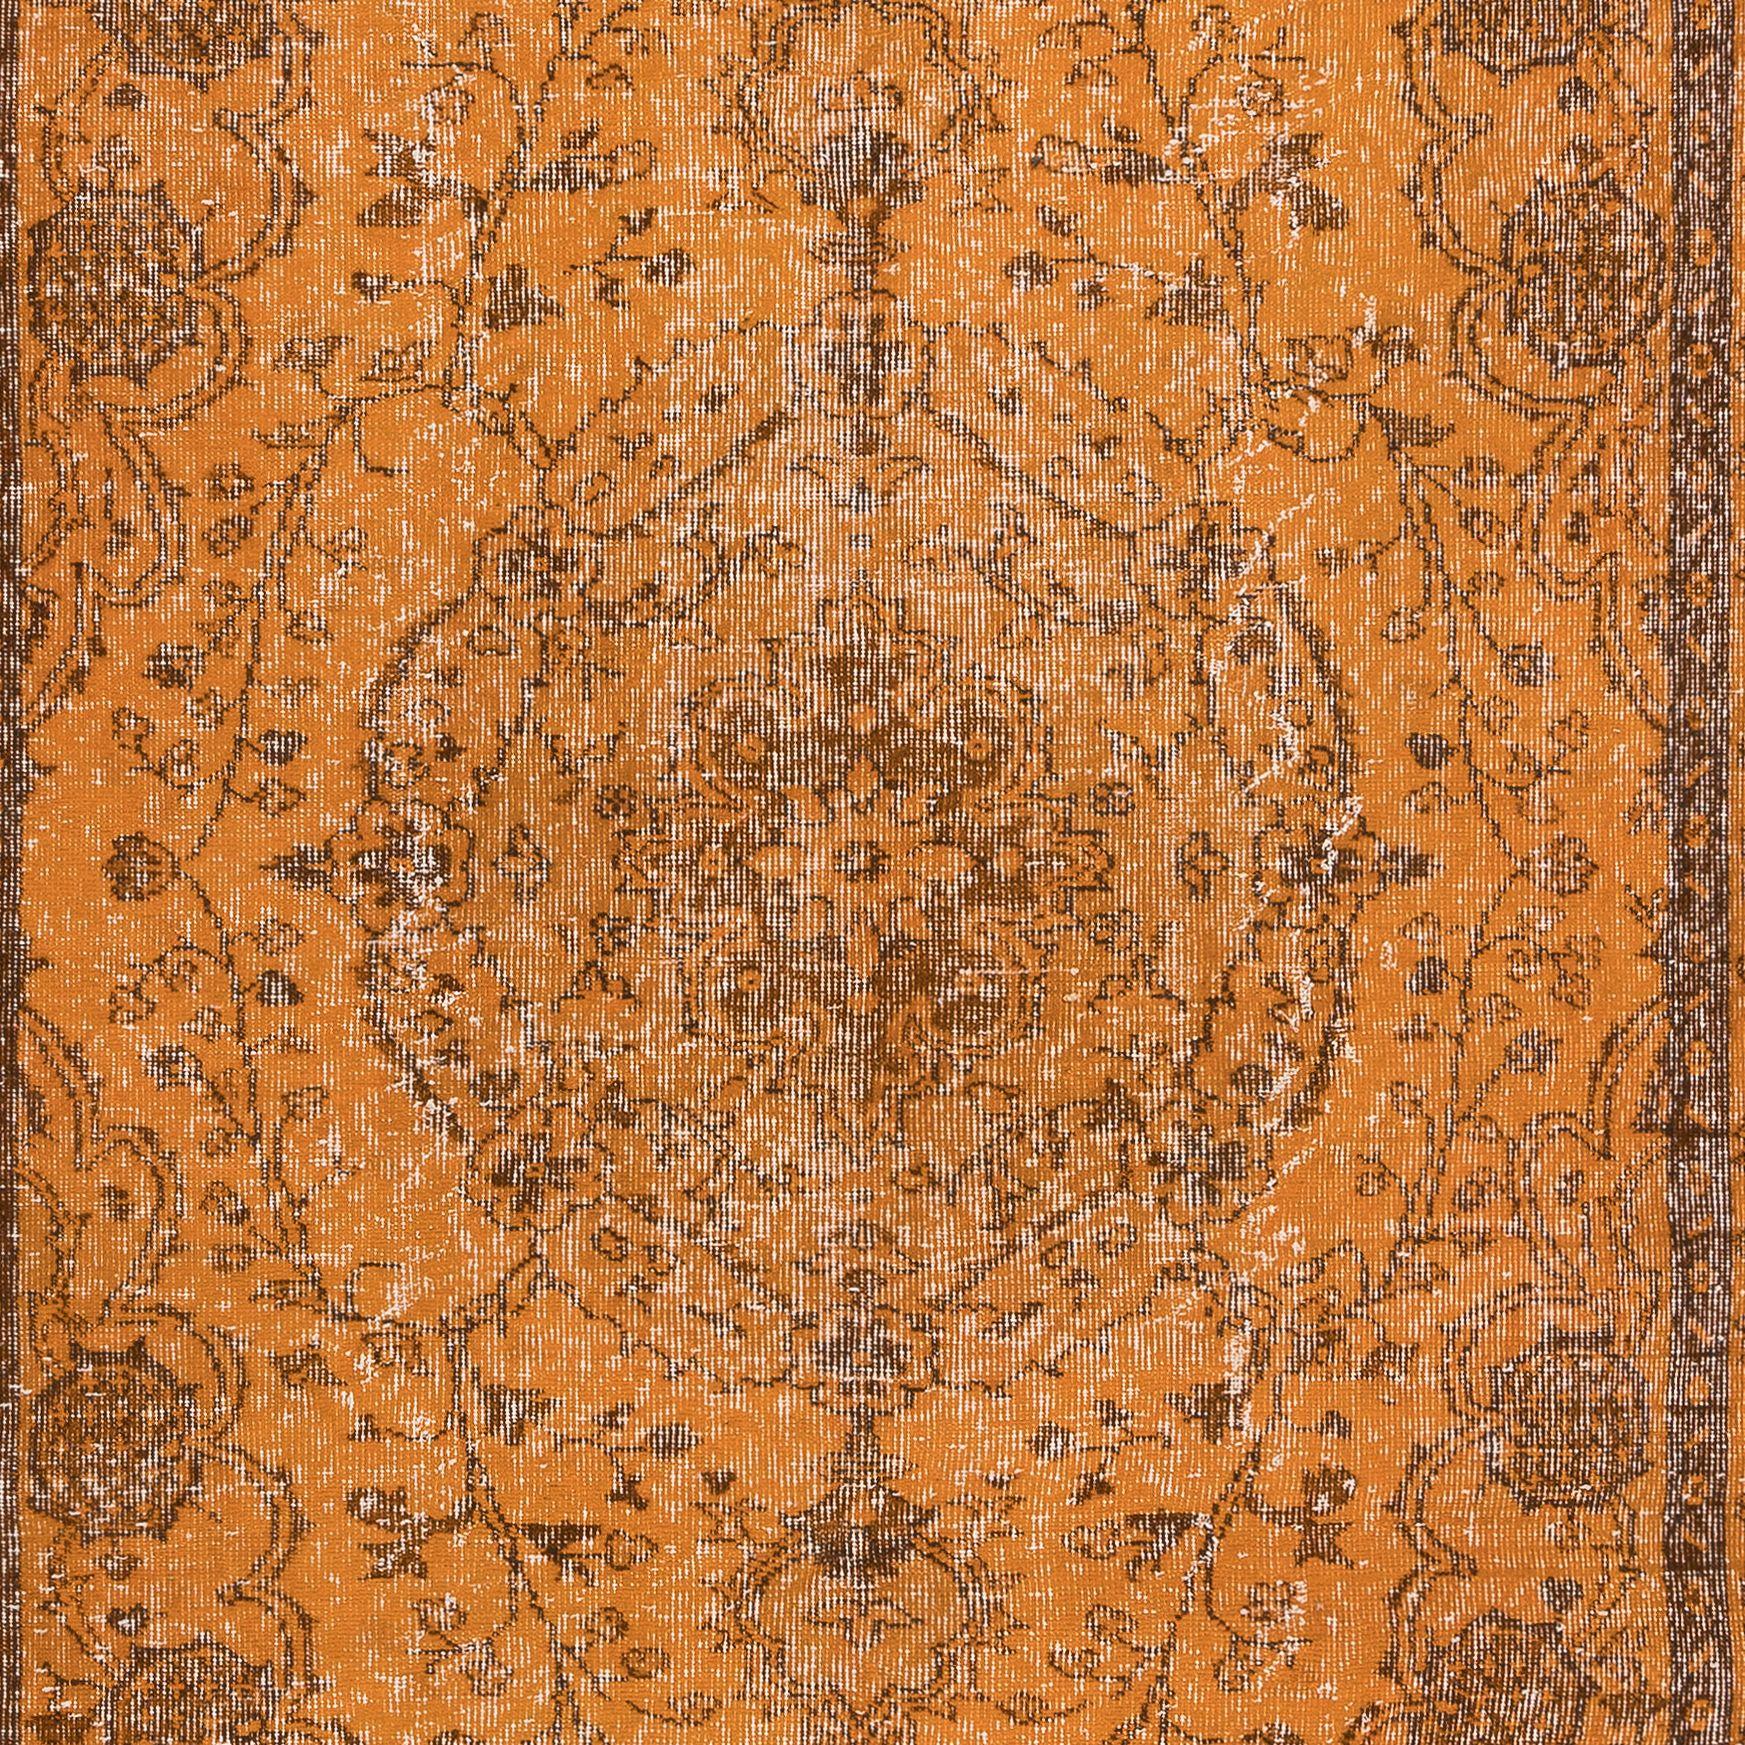 Turkish 6x9 Ft Orange Area Rug for Modern Interiors, Hand Knotted in Turkey For Sale